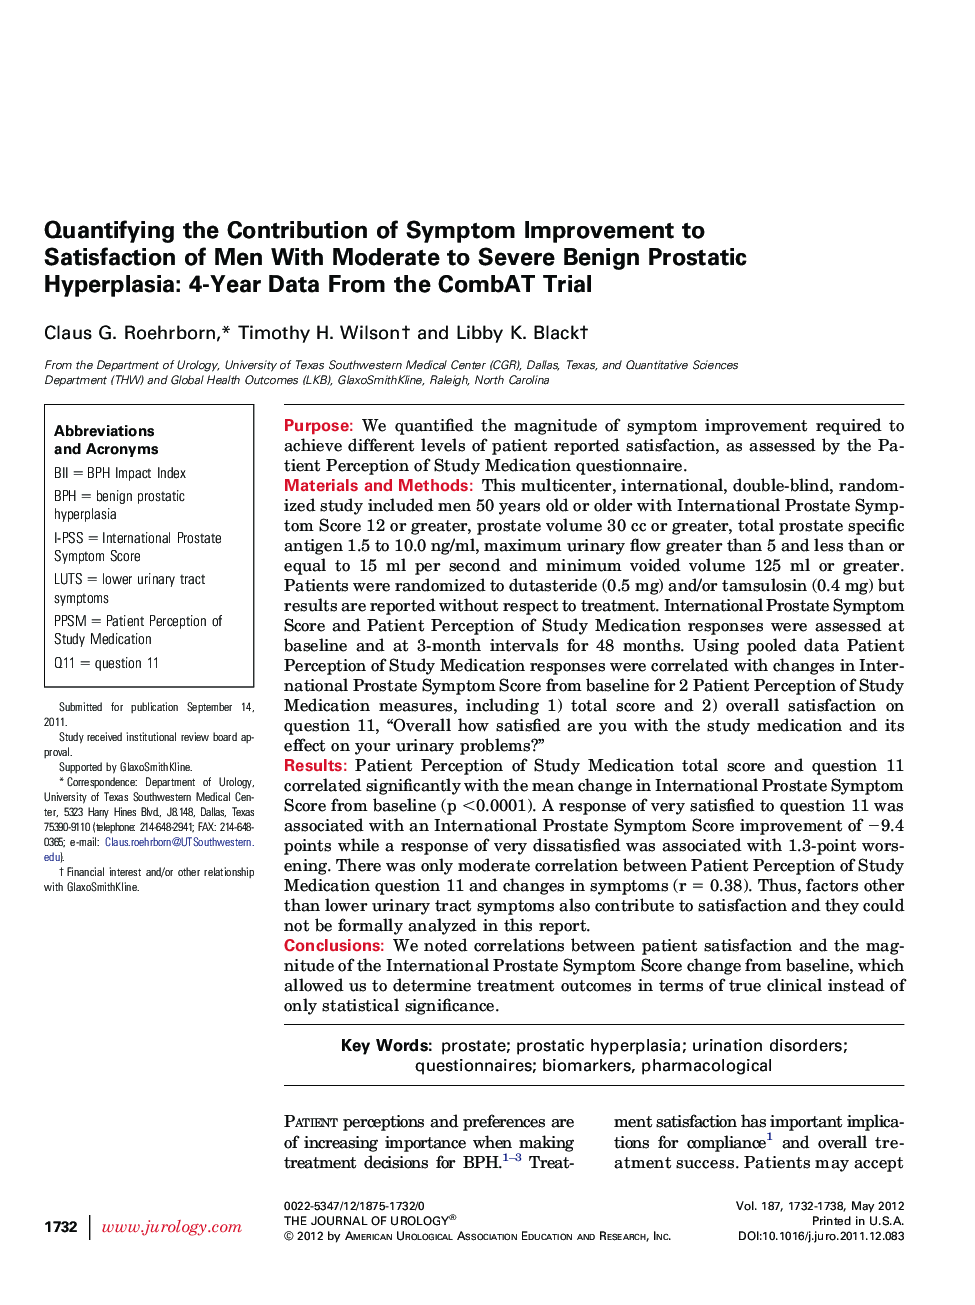 Quantifying the Contribution of Symptom Improvement to Satisfaction of Men With Moderate to Severe Benign Prostatic Hyperplasia: 4-Year Data From the CombAT Trial